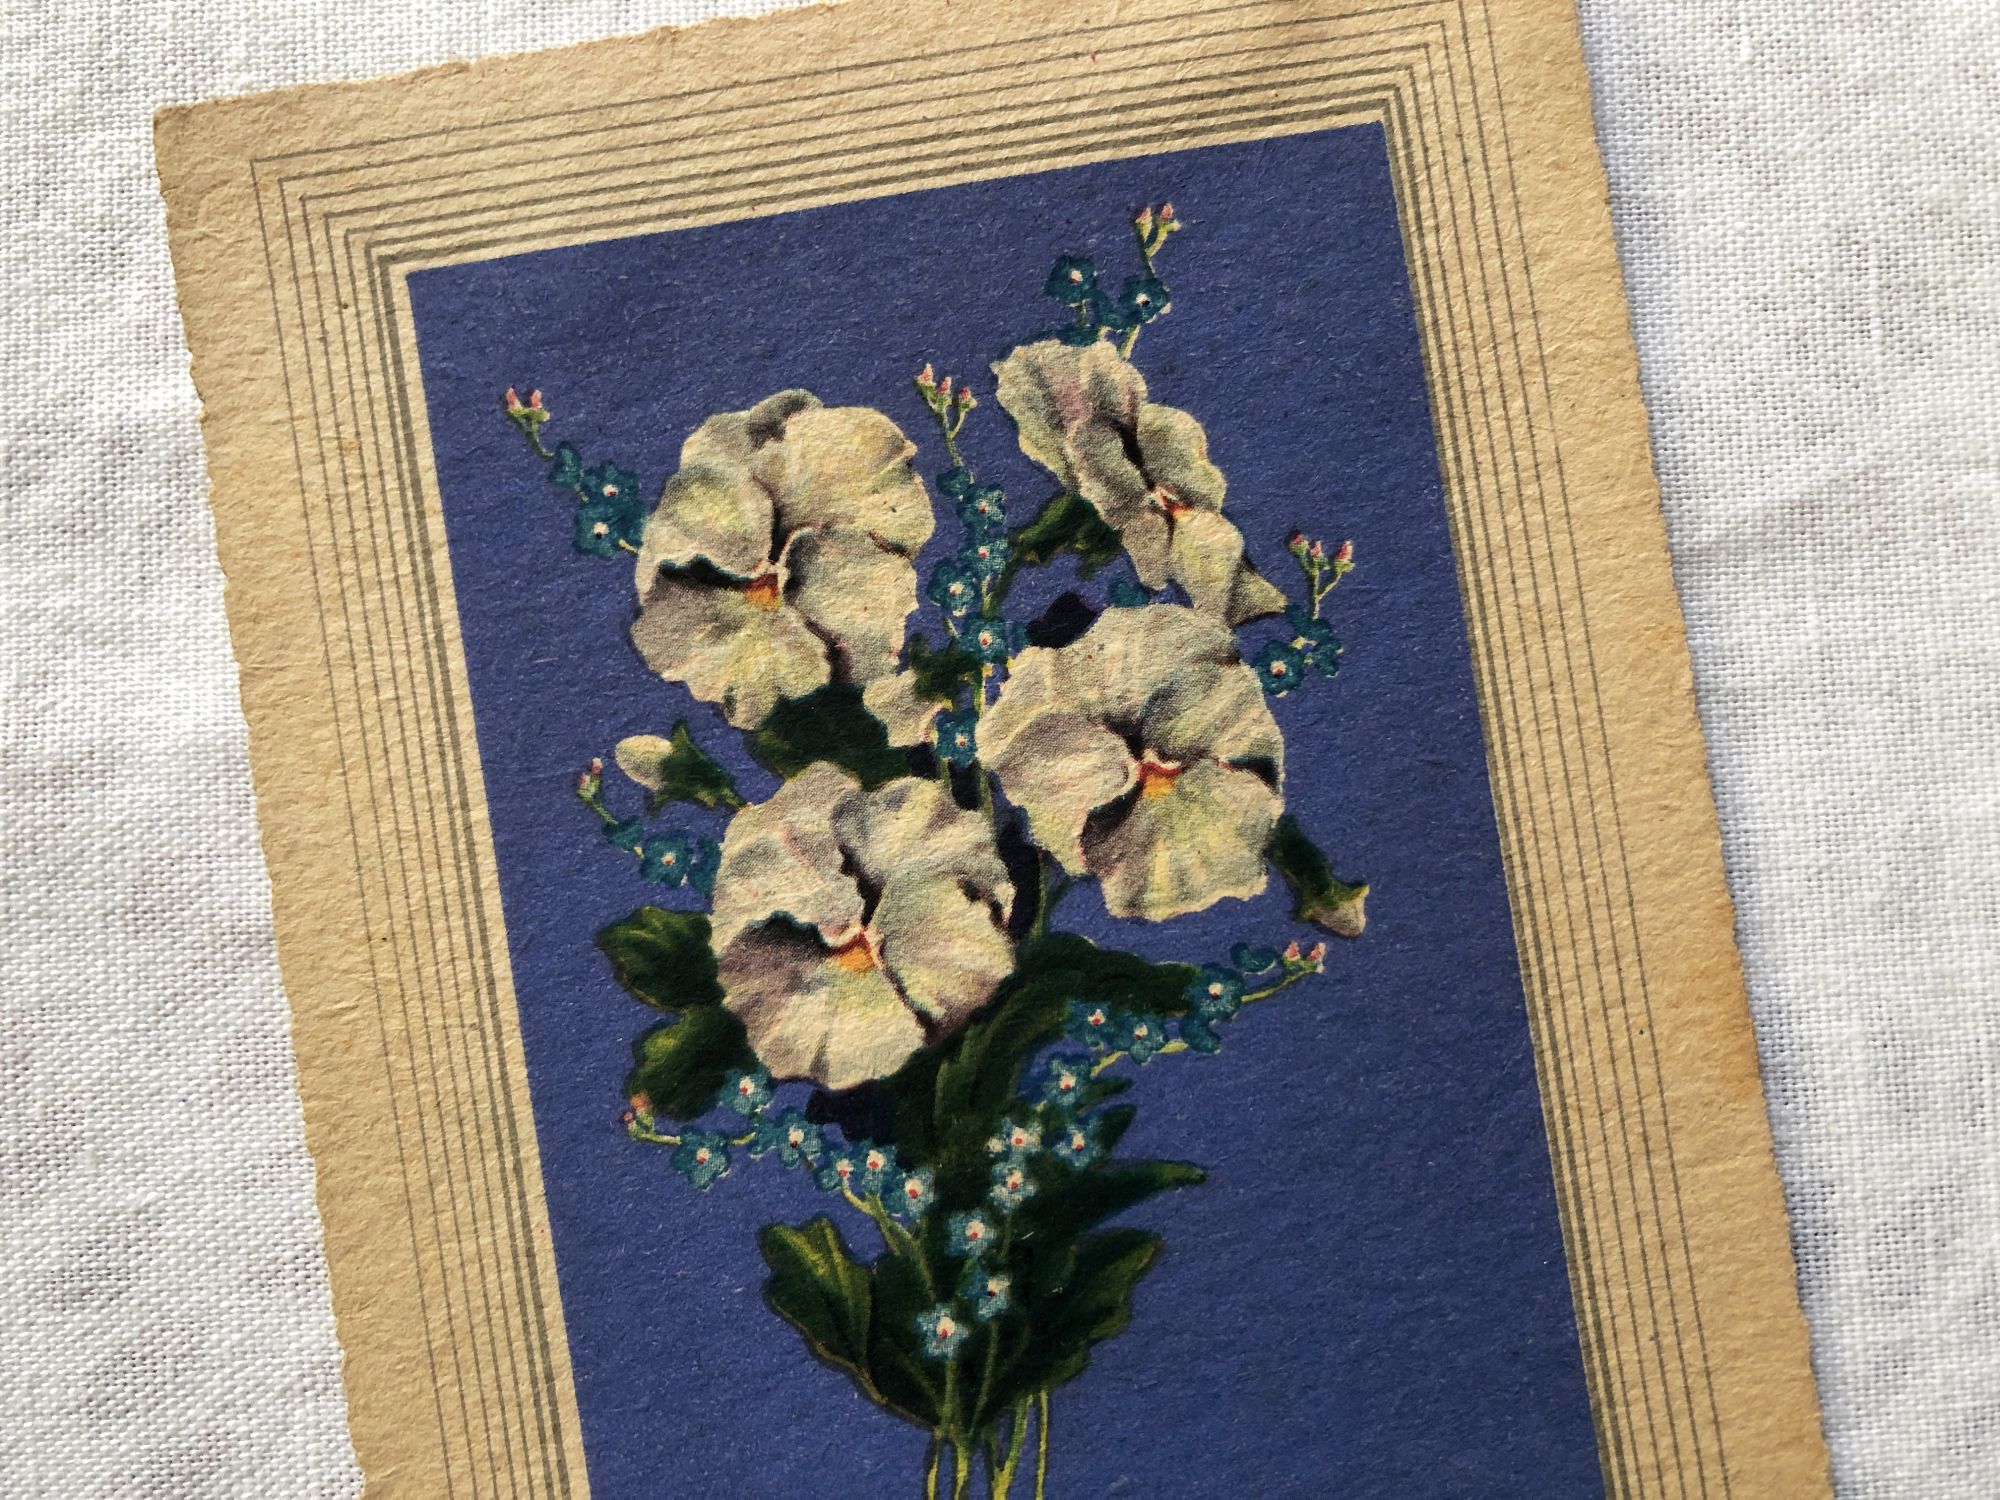 French postcard with a flower and the inscription "Bonne fête" from 1940s